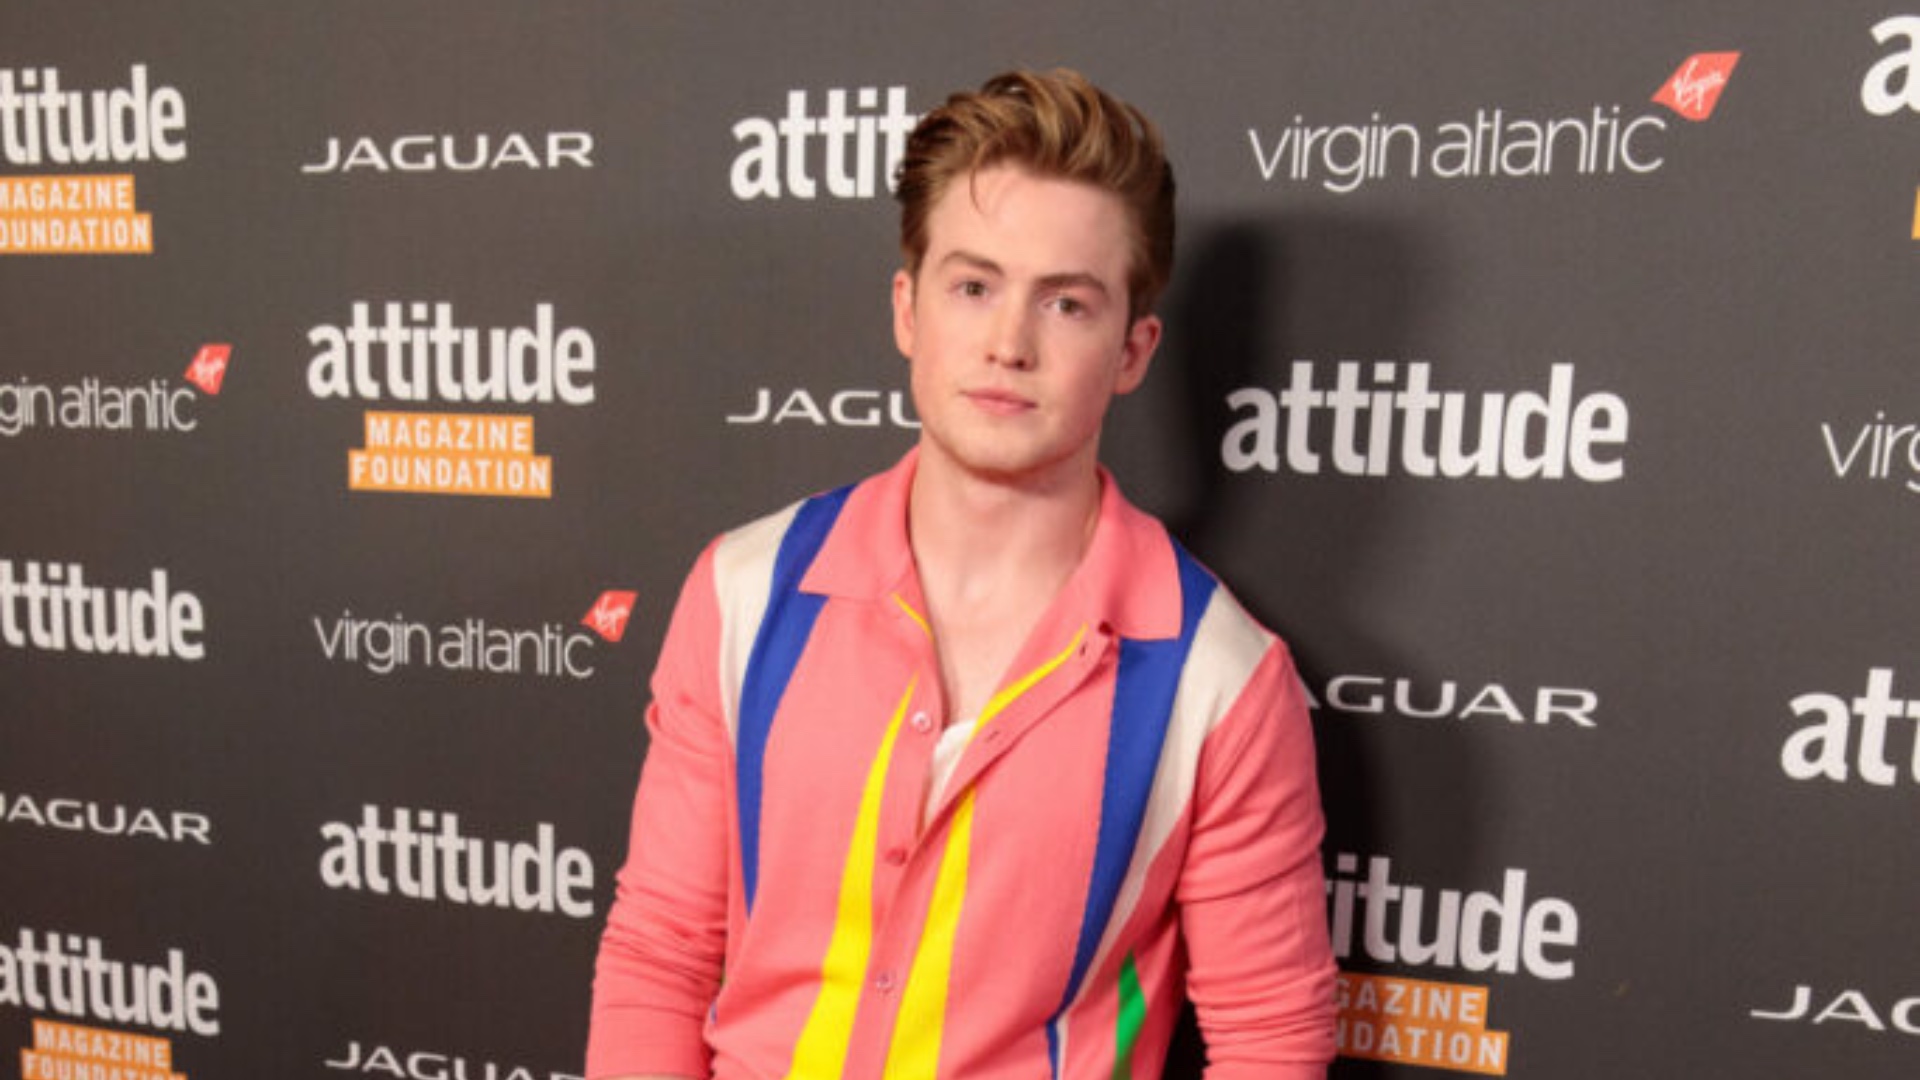 Kit Connor at the Attitude Awards 2022